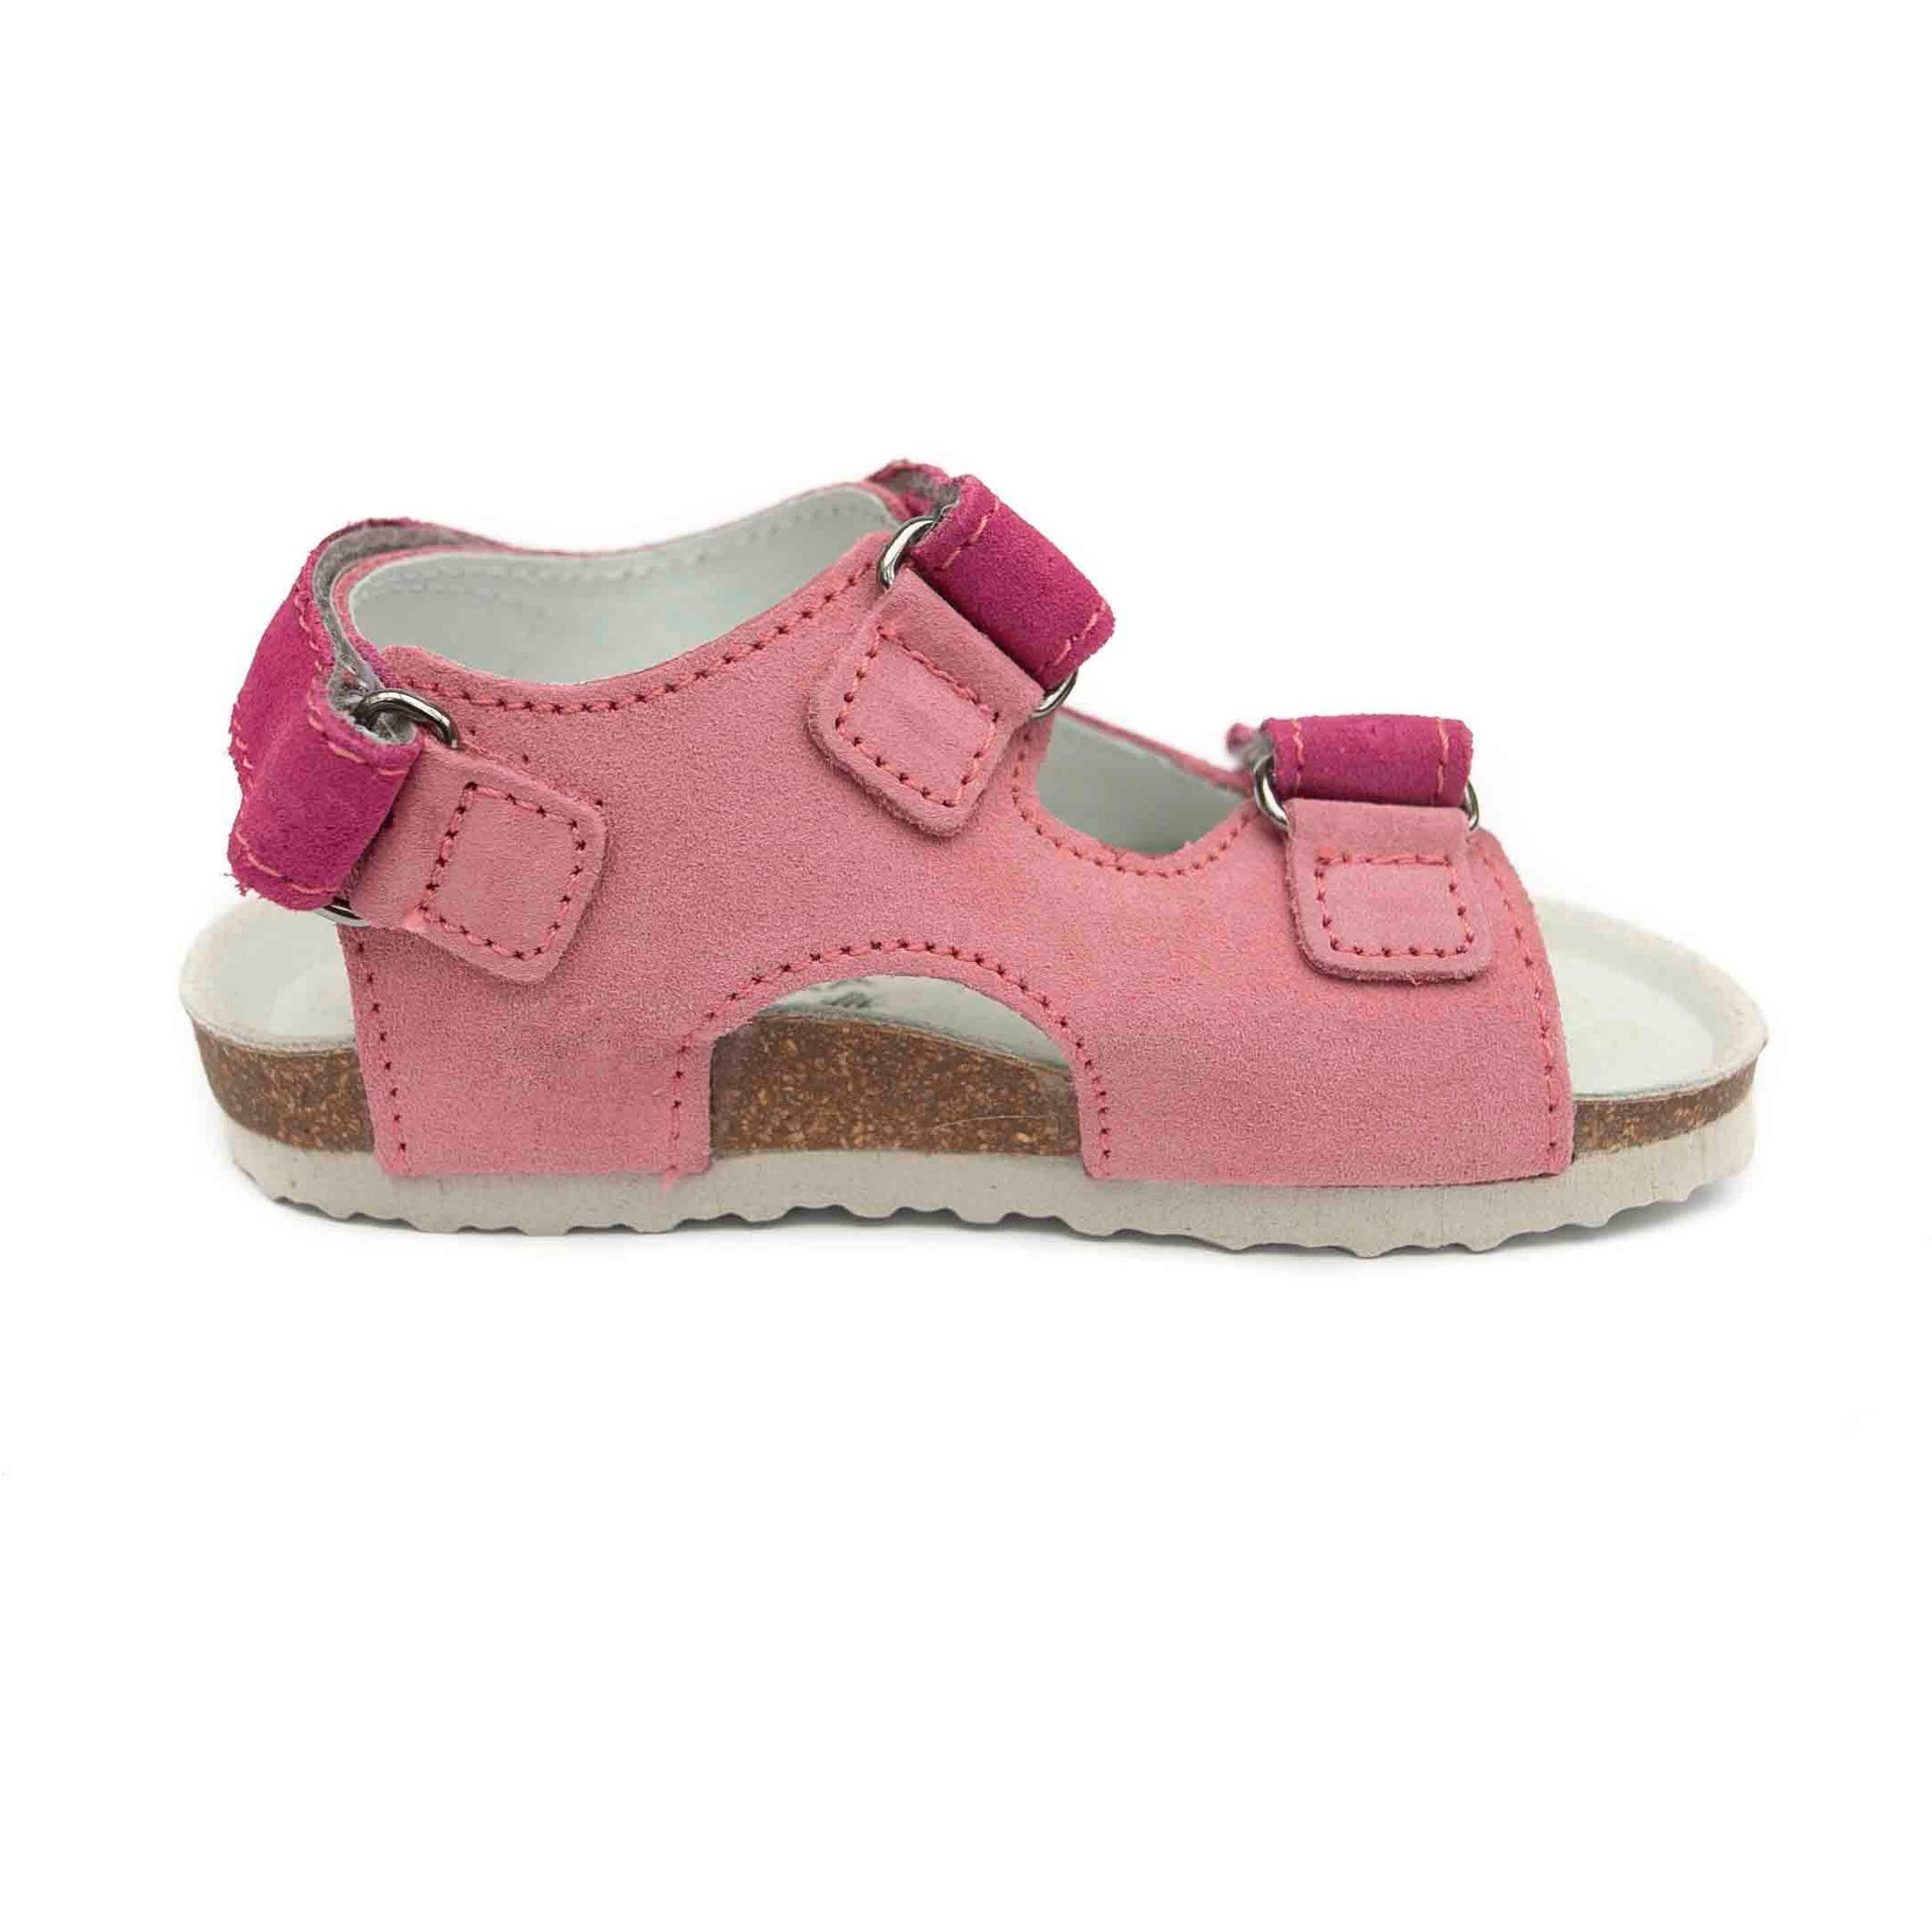 orthopedic older girls sandals  with open heel: T27: color pink - feelgoodshoes.ae